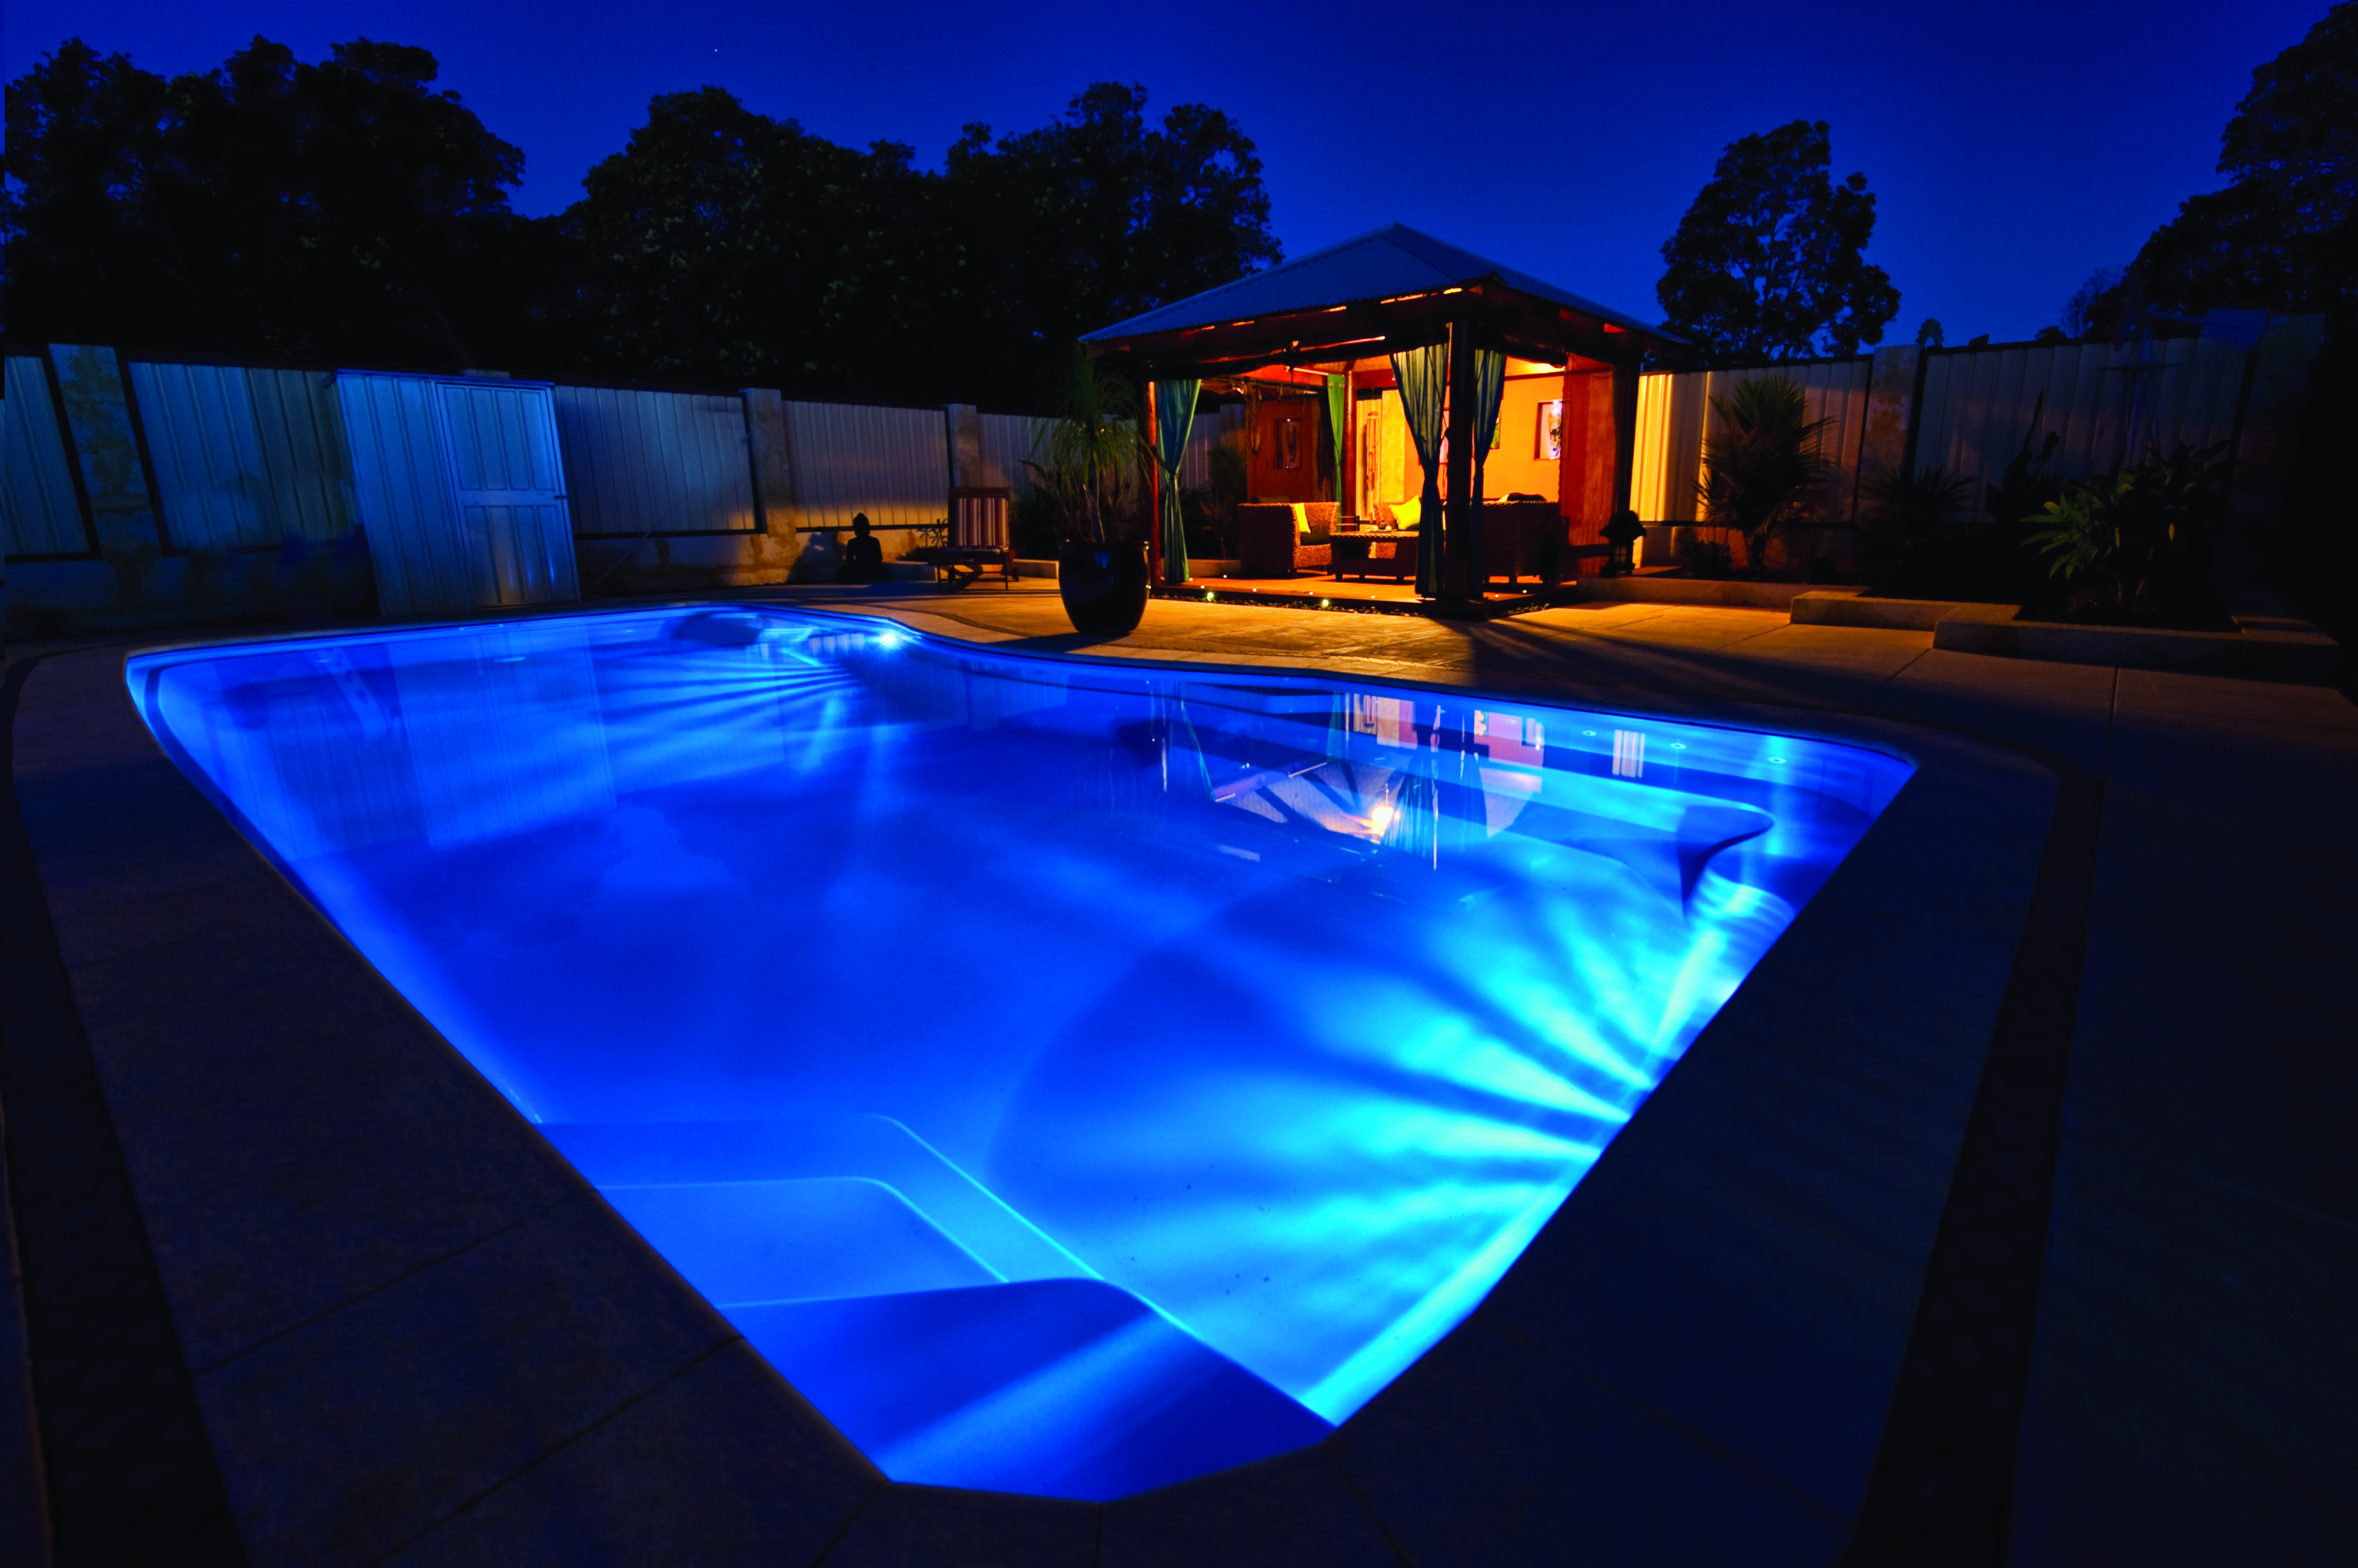 Pool Planning, Design, Tips and Considerations